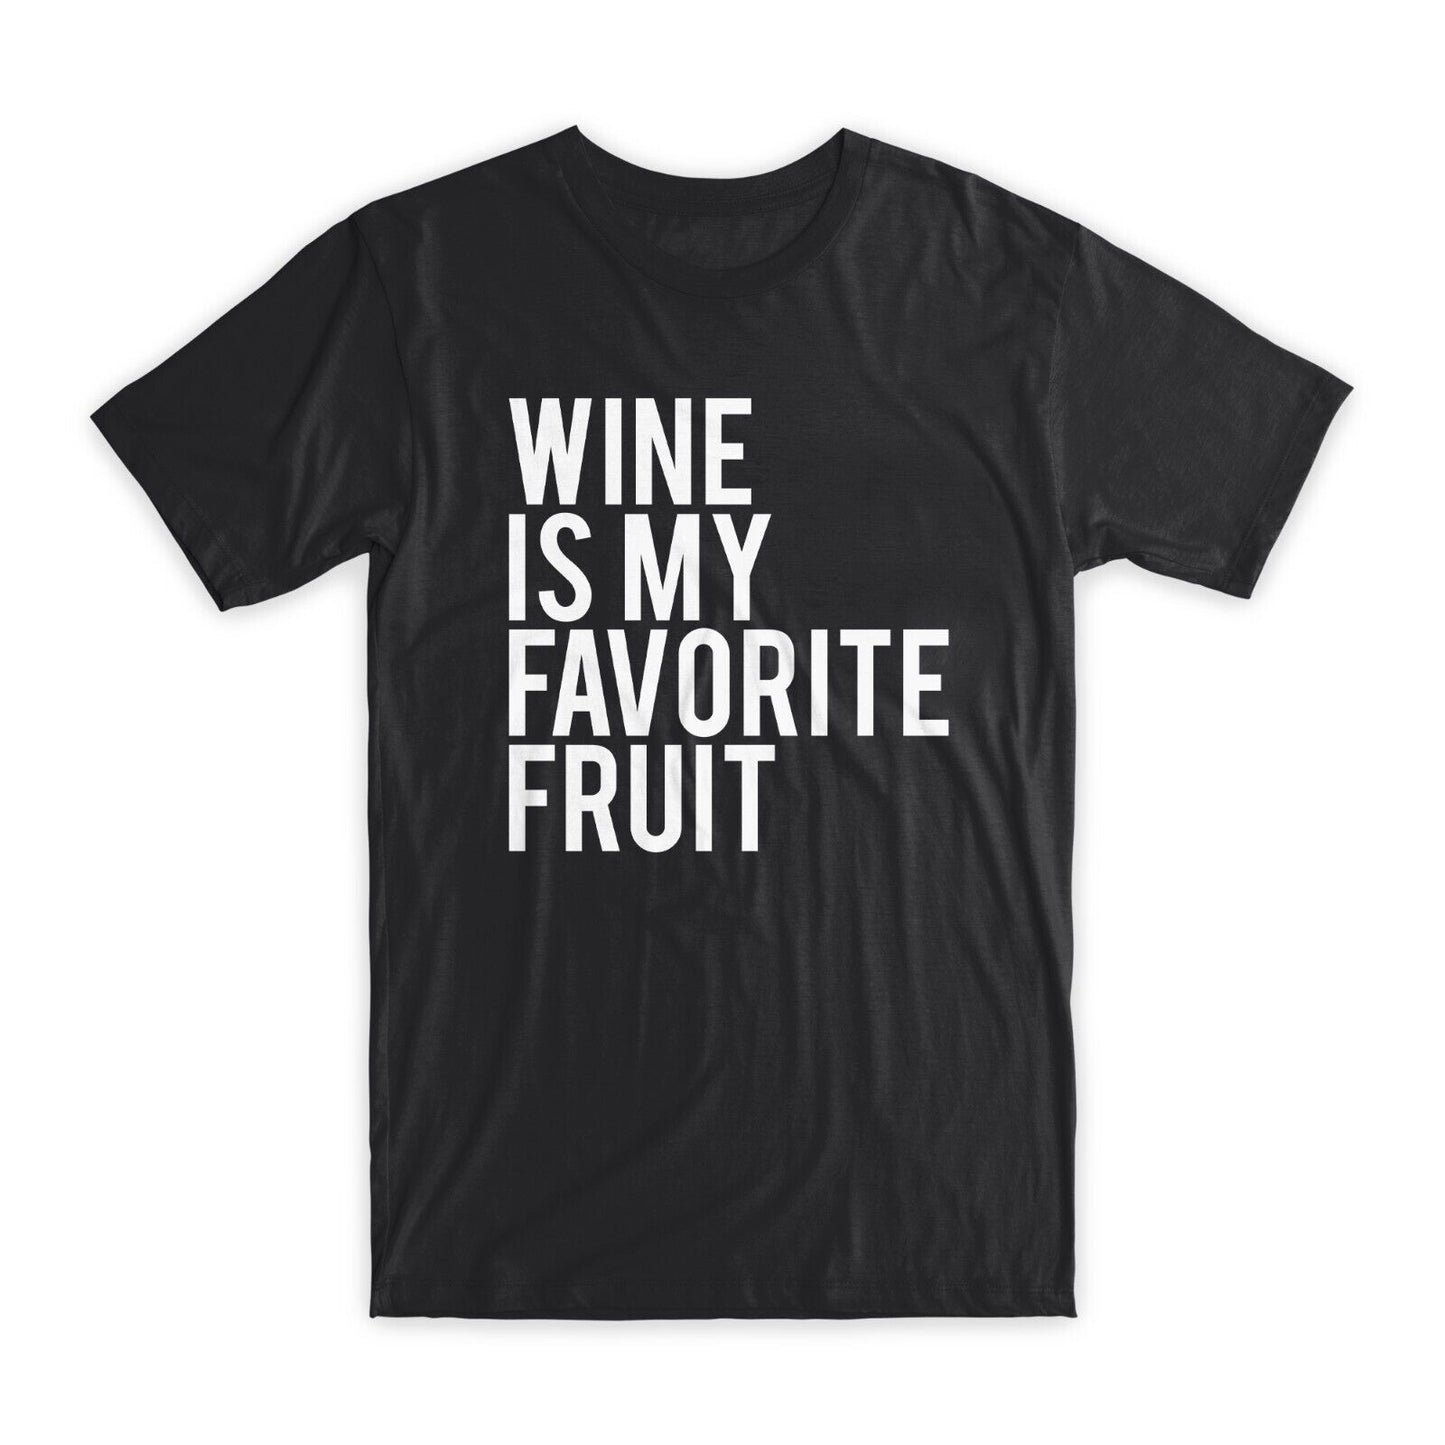 Wine is My Favorite Fruit T-Shirt Premium Cotton Crew Neck Funny Tees Gifts NEW